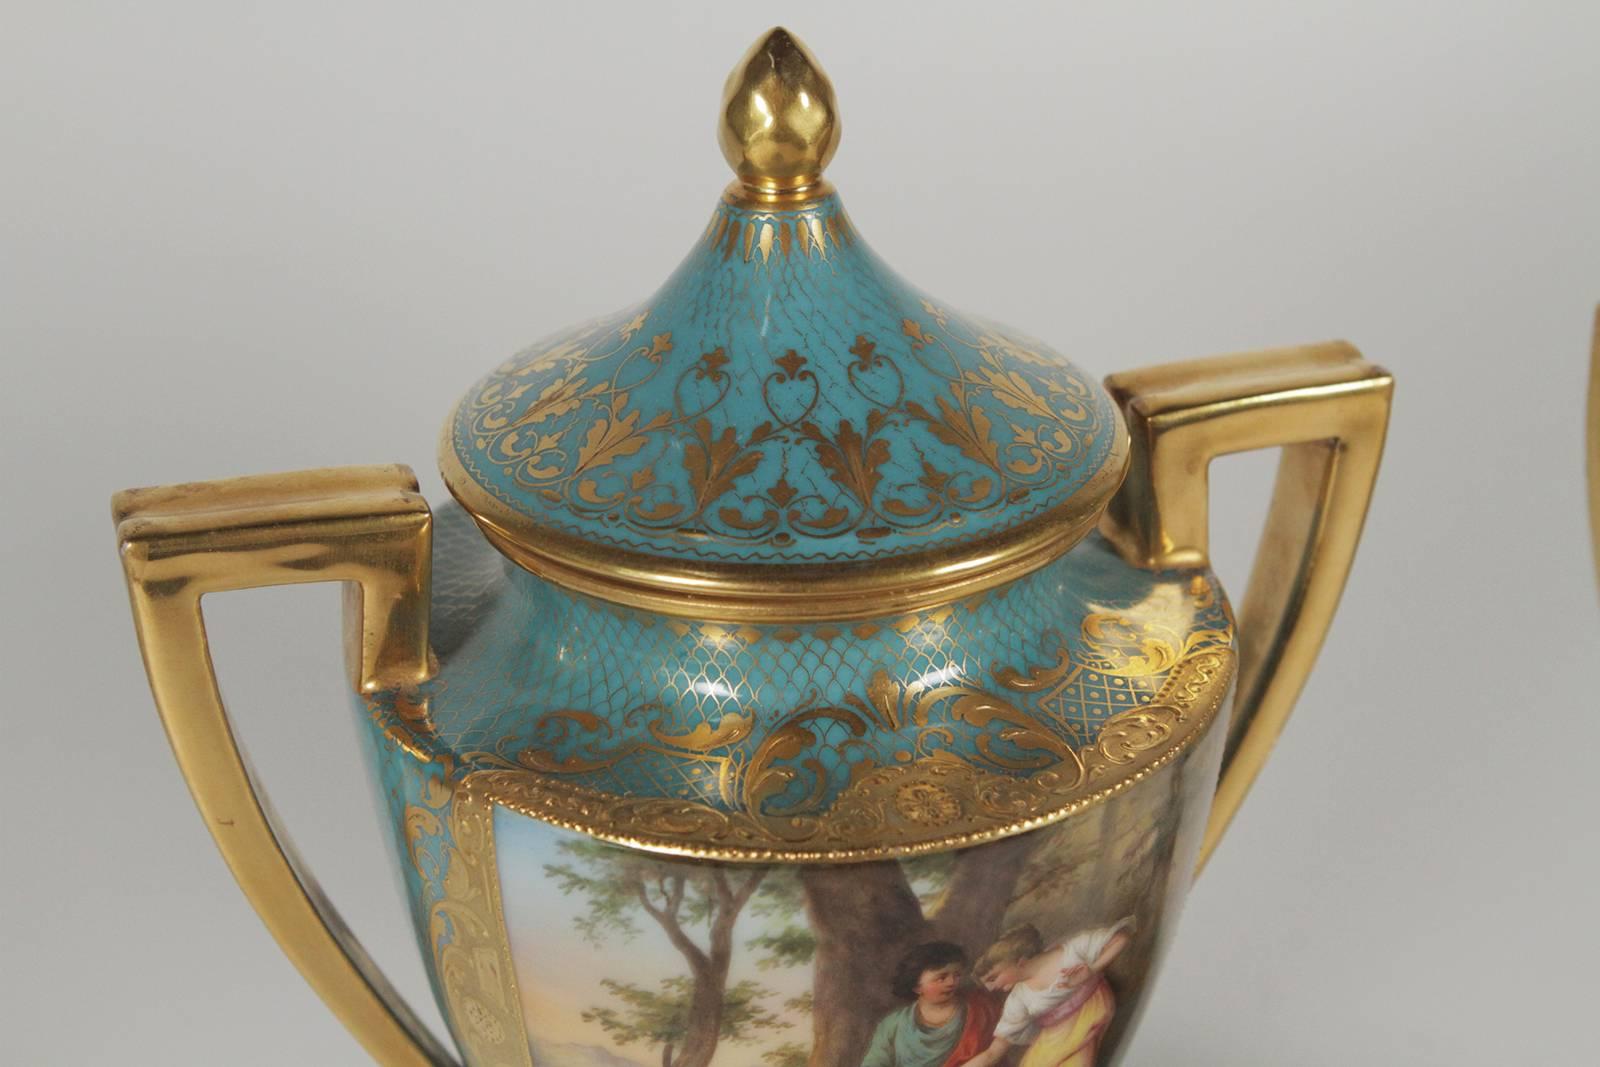 Aesthetic Movement Pair of Late 19th Century Hand-Painted and Gilt Urns